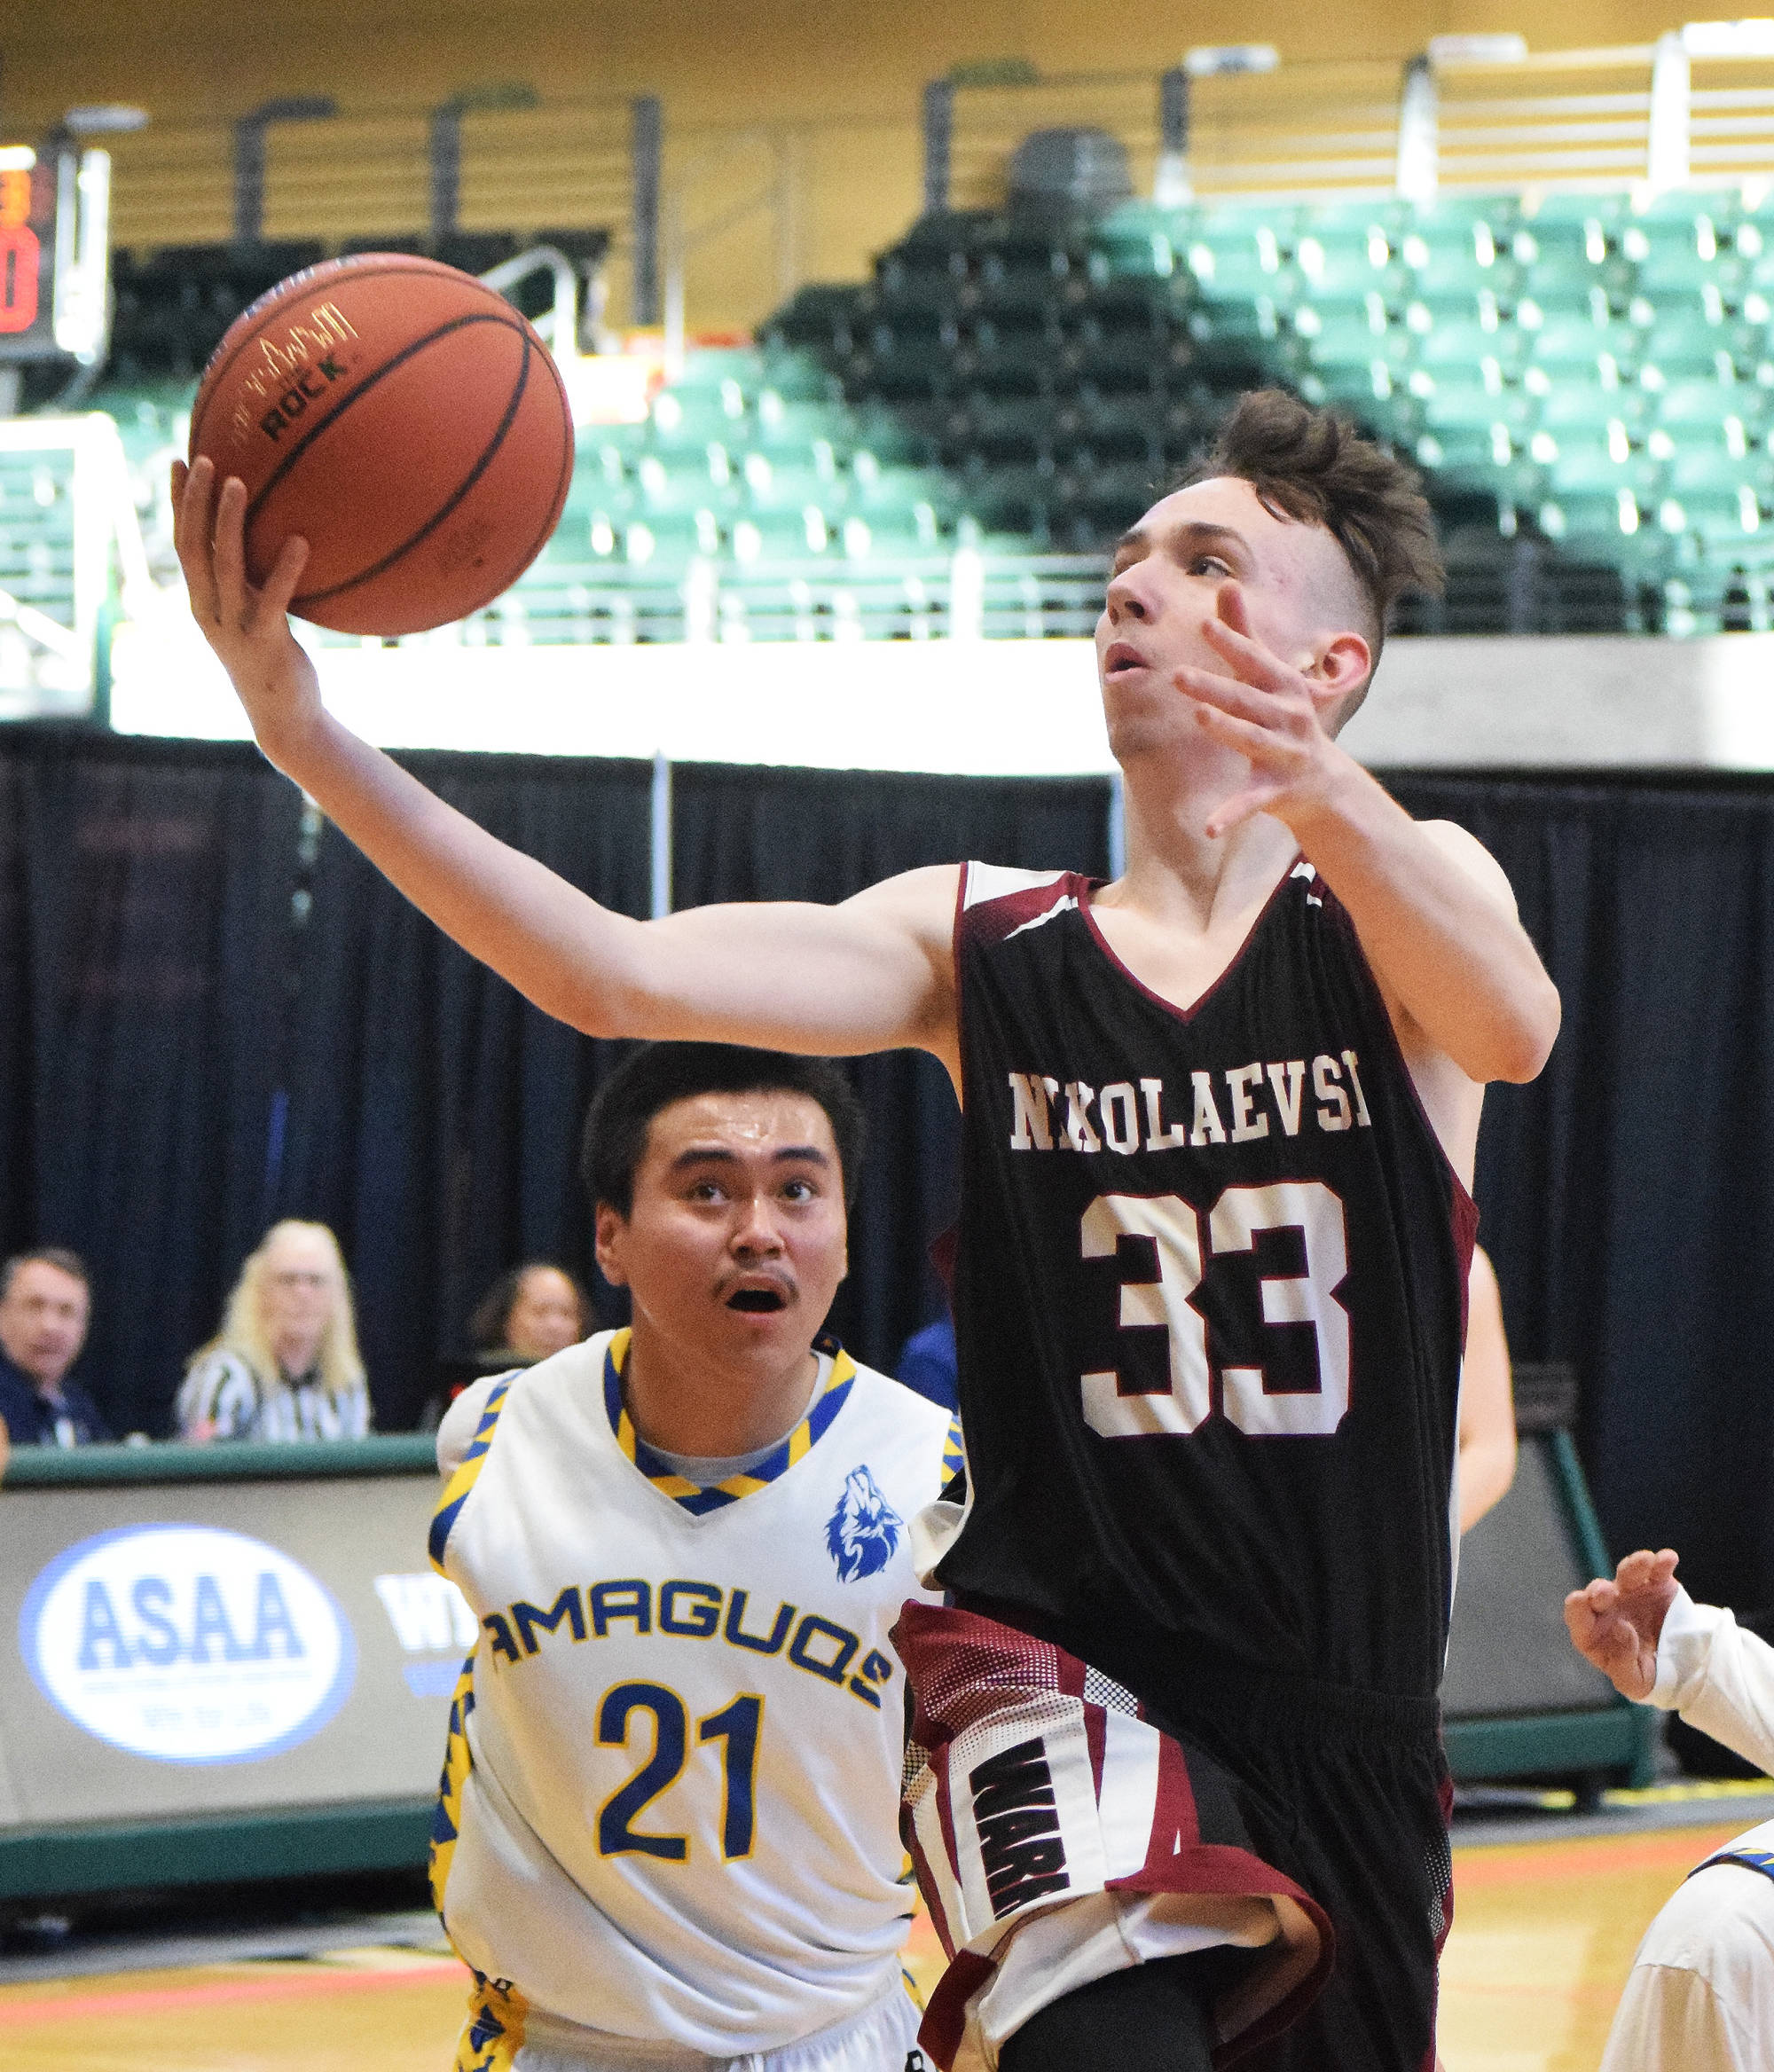 Nikolaevsk’s J.D. Mumey (33) rolls in a layup Thursday in a Class 1A state tournament quarterfinal against Nunamiut at the Alaska Airlines Center in Anchorage. (Photo by Joey Klecka/Peninsula Clarion)